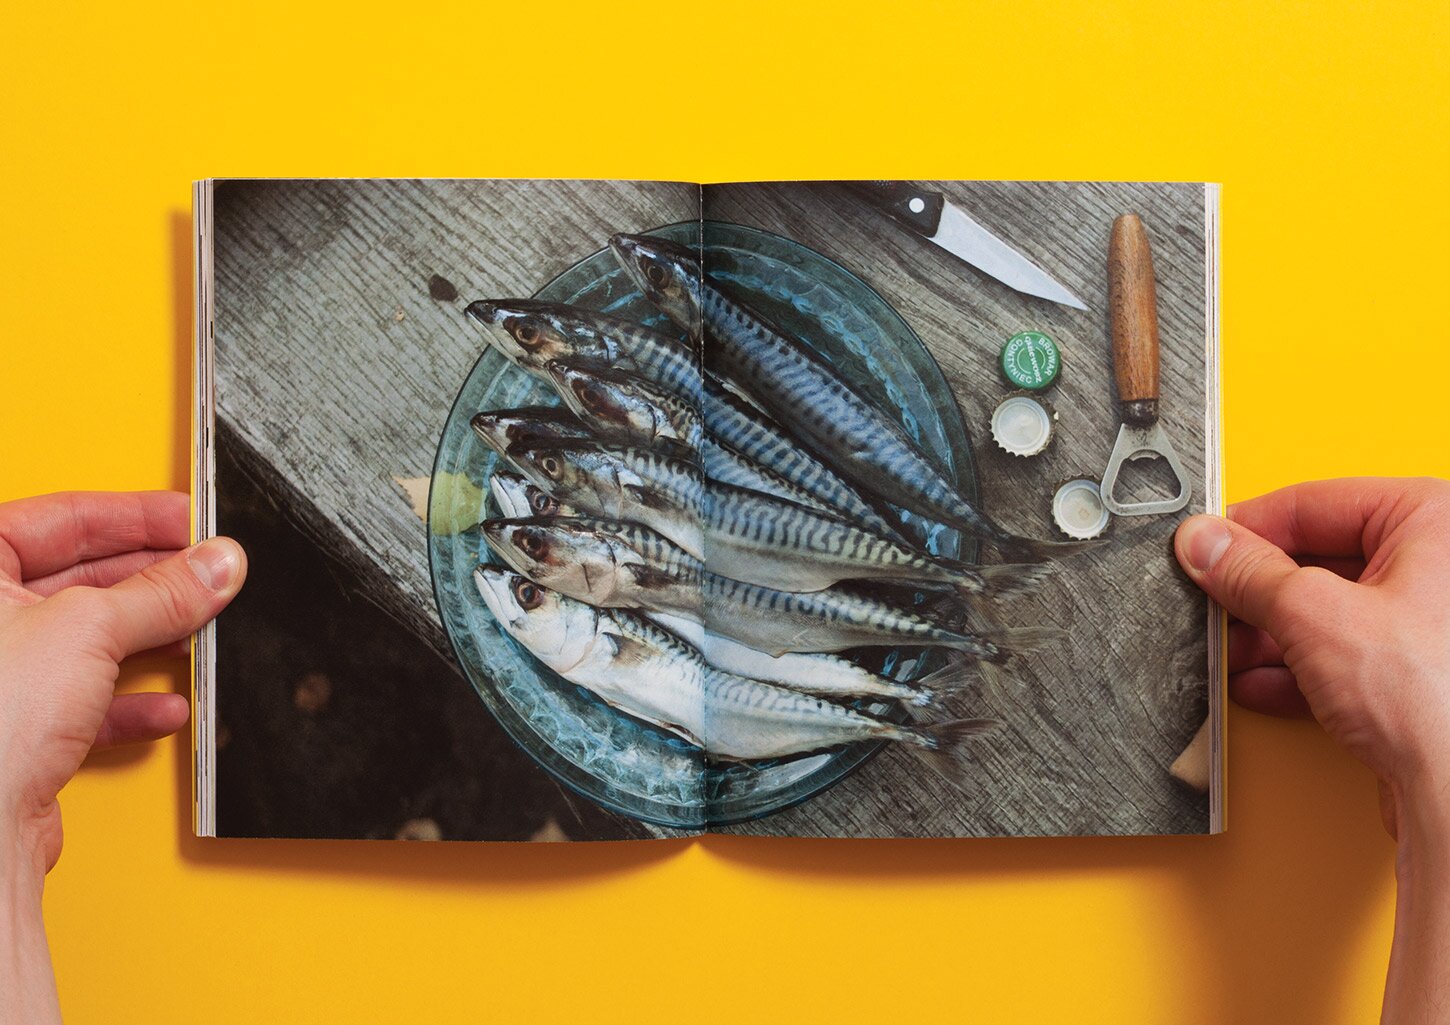 Spread from the UCZTA cookbook with a picture of a mackerel